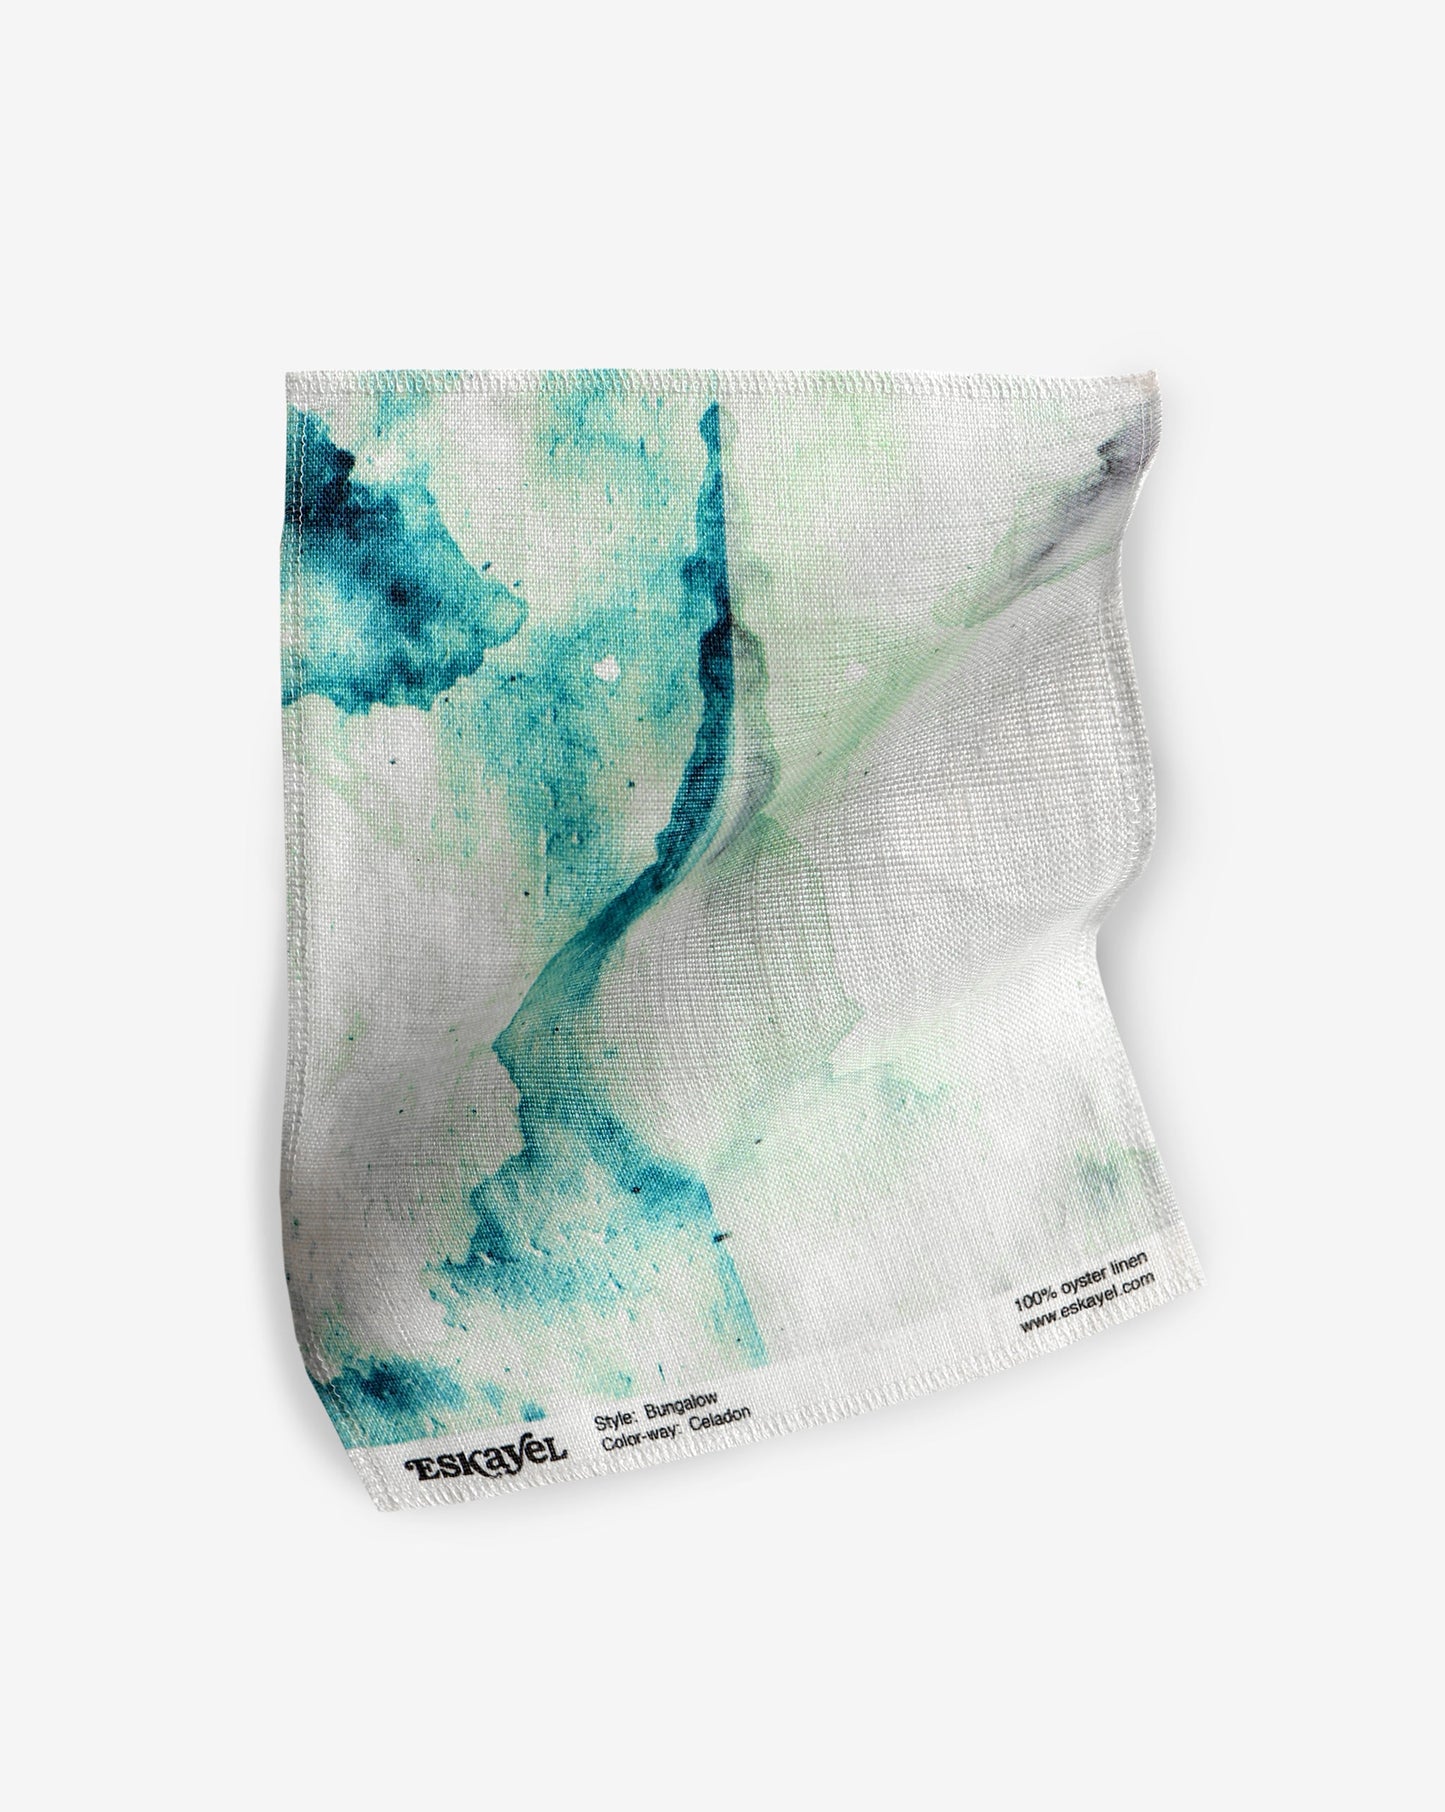 A hand fabric with a watercolor design from the Bungalow Fabric Celadon capsule collection